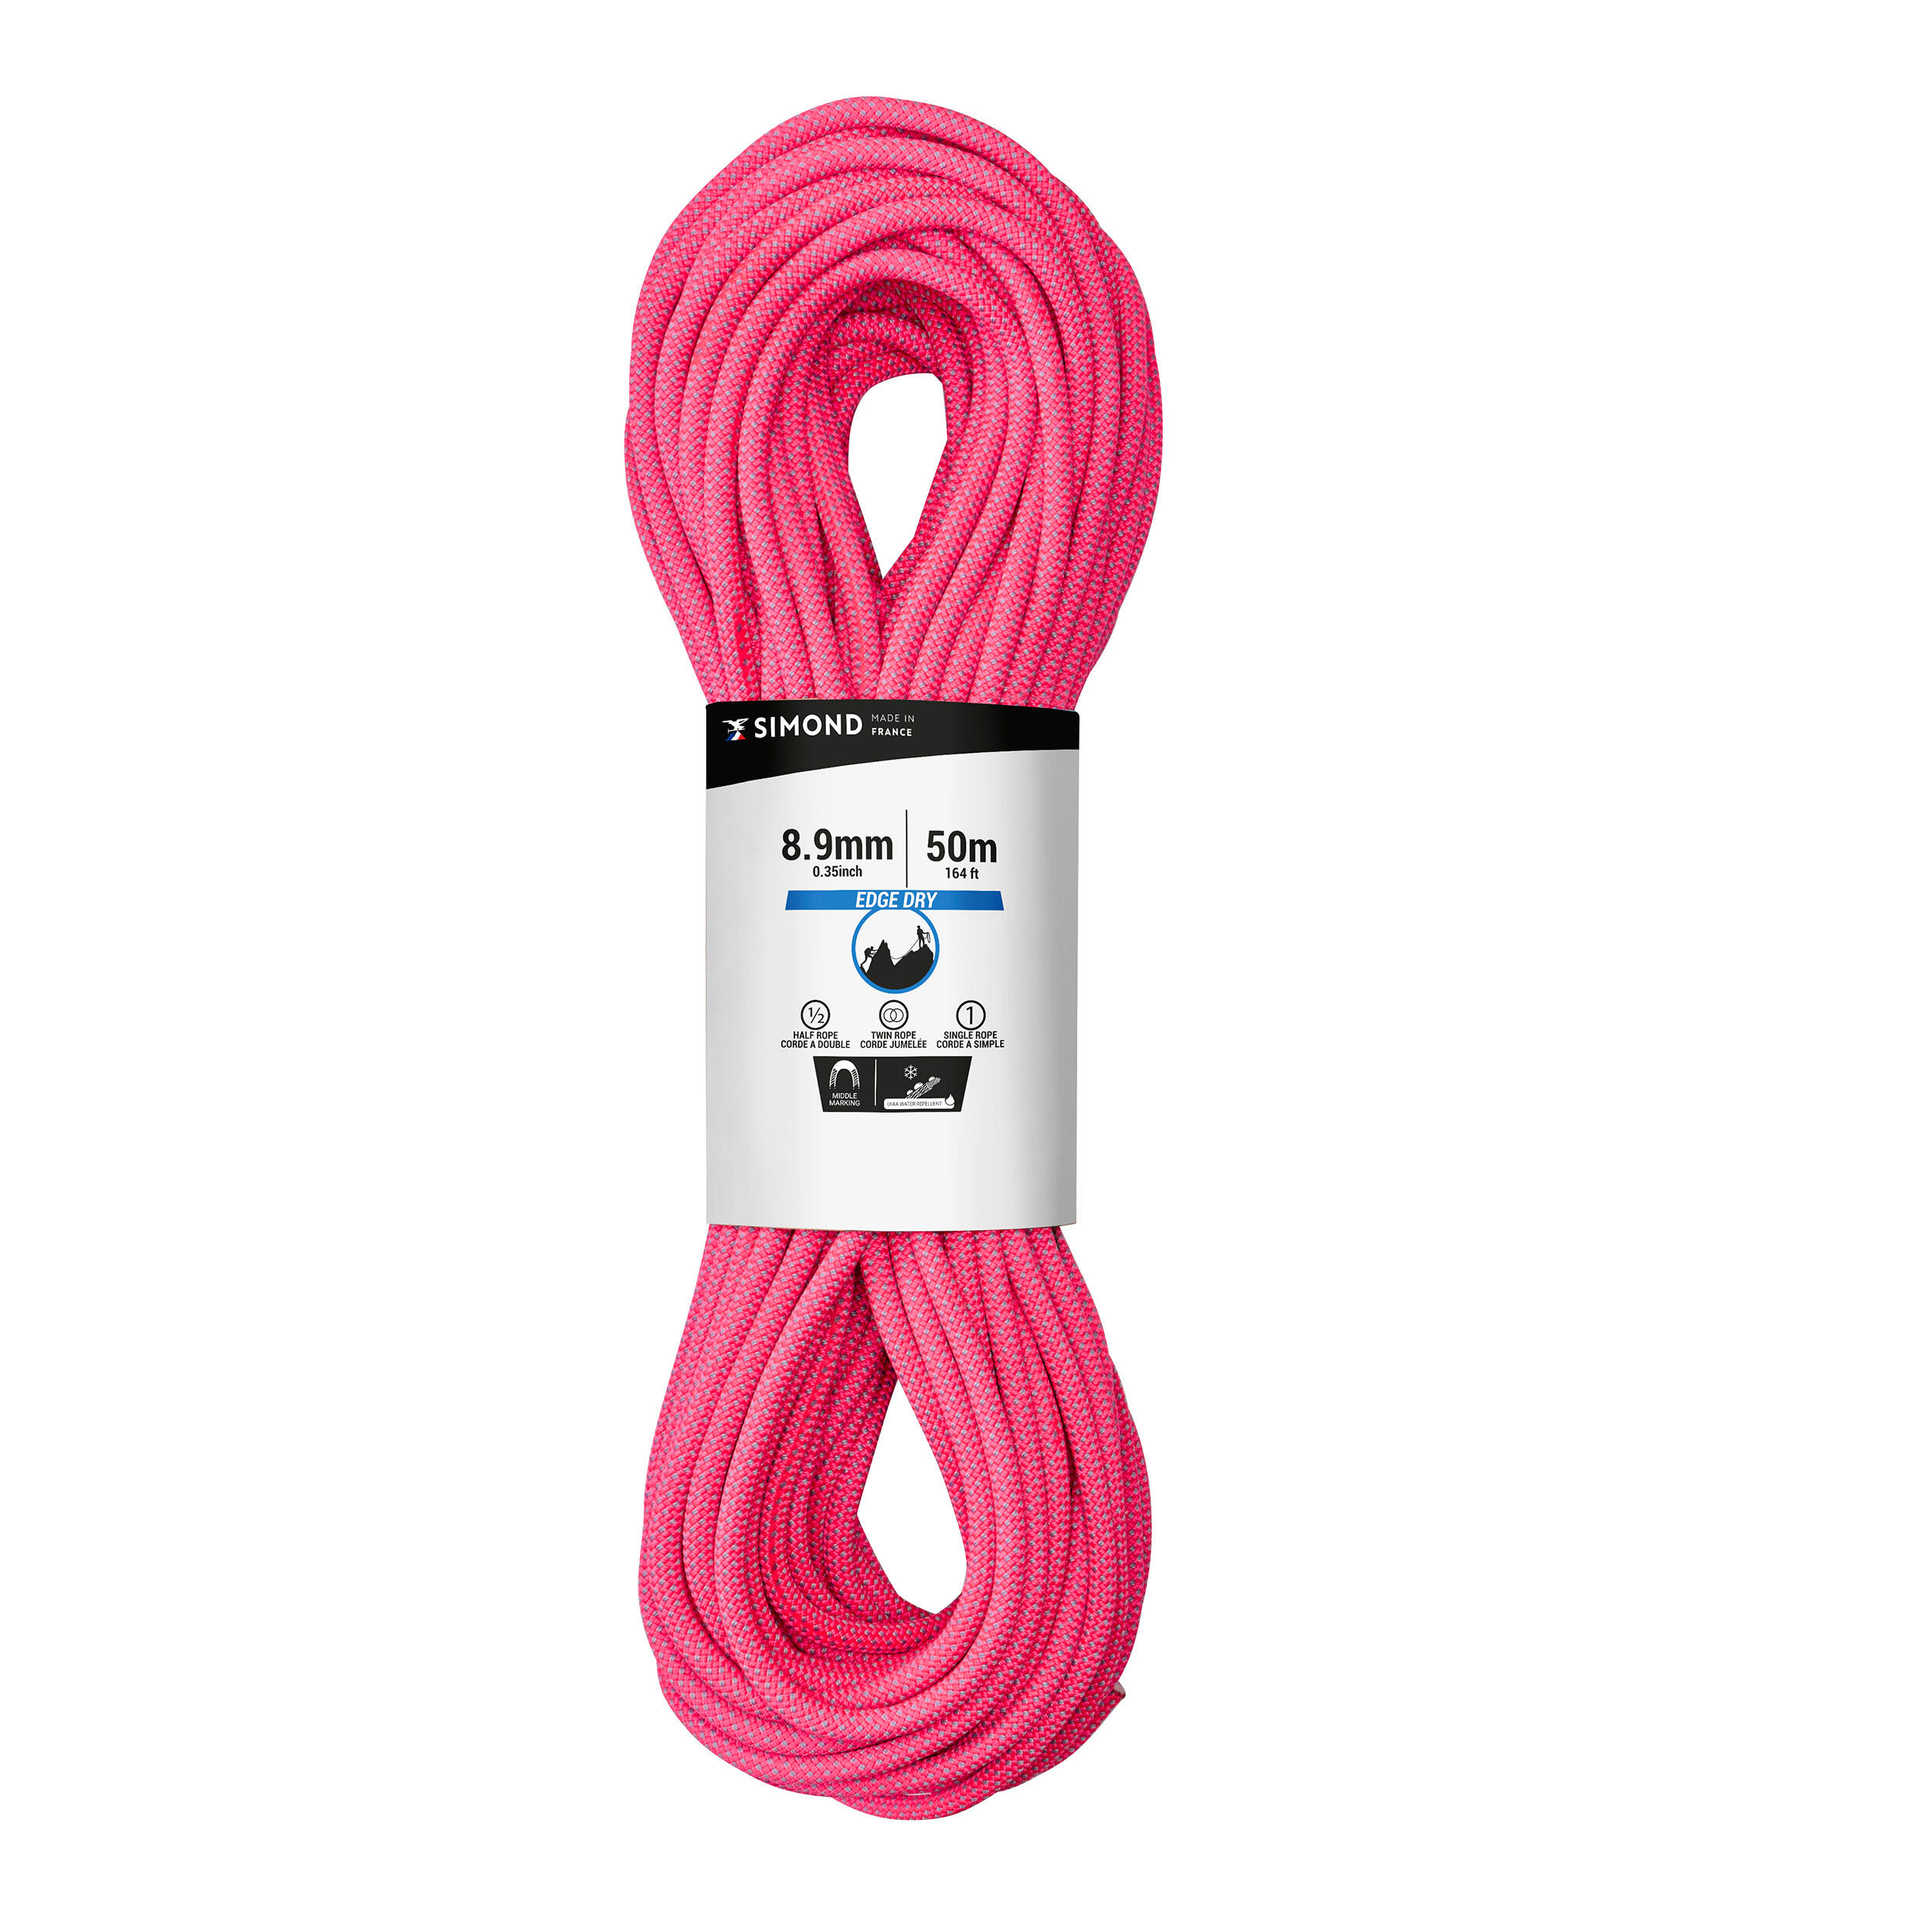 Simond Triple Dry Rope Standard For Climbing And Mountaineering 8.9mmx50m-edge Rose